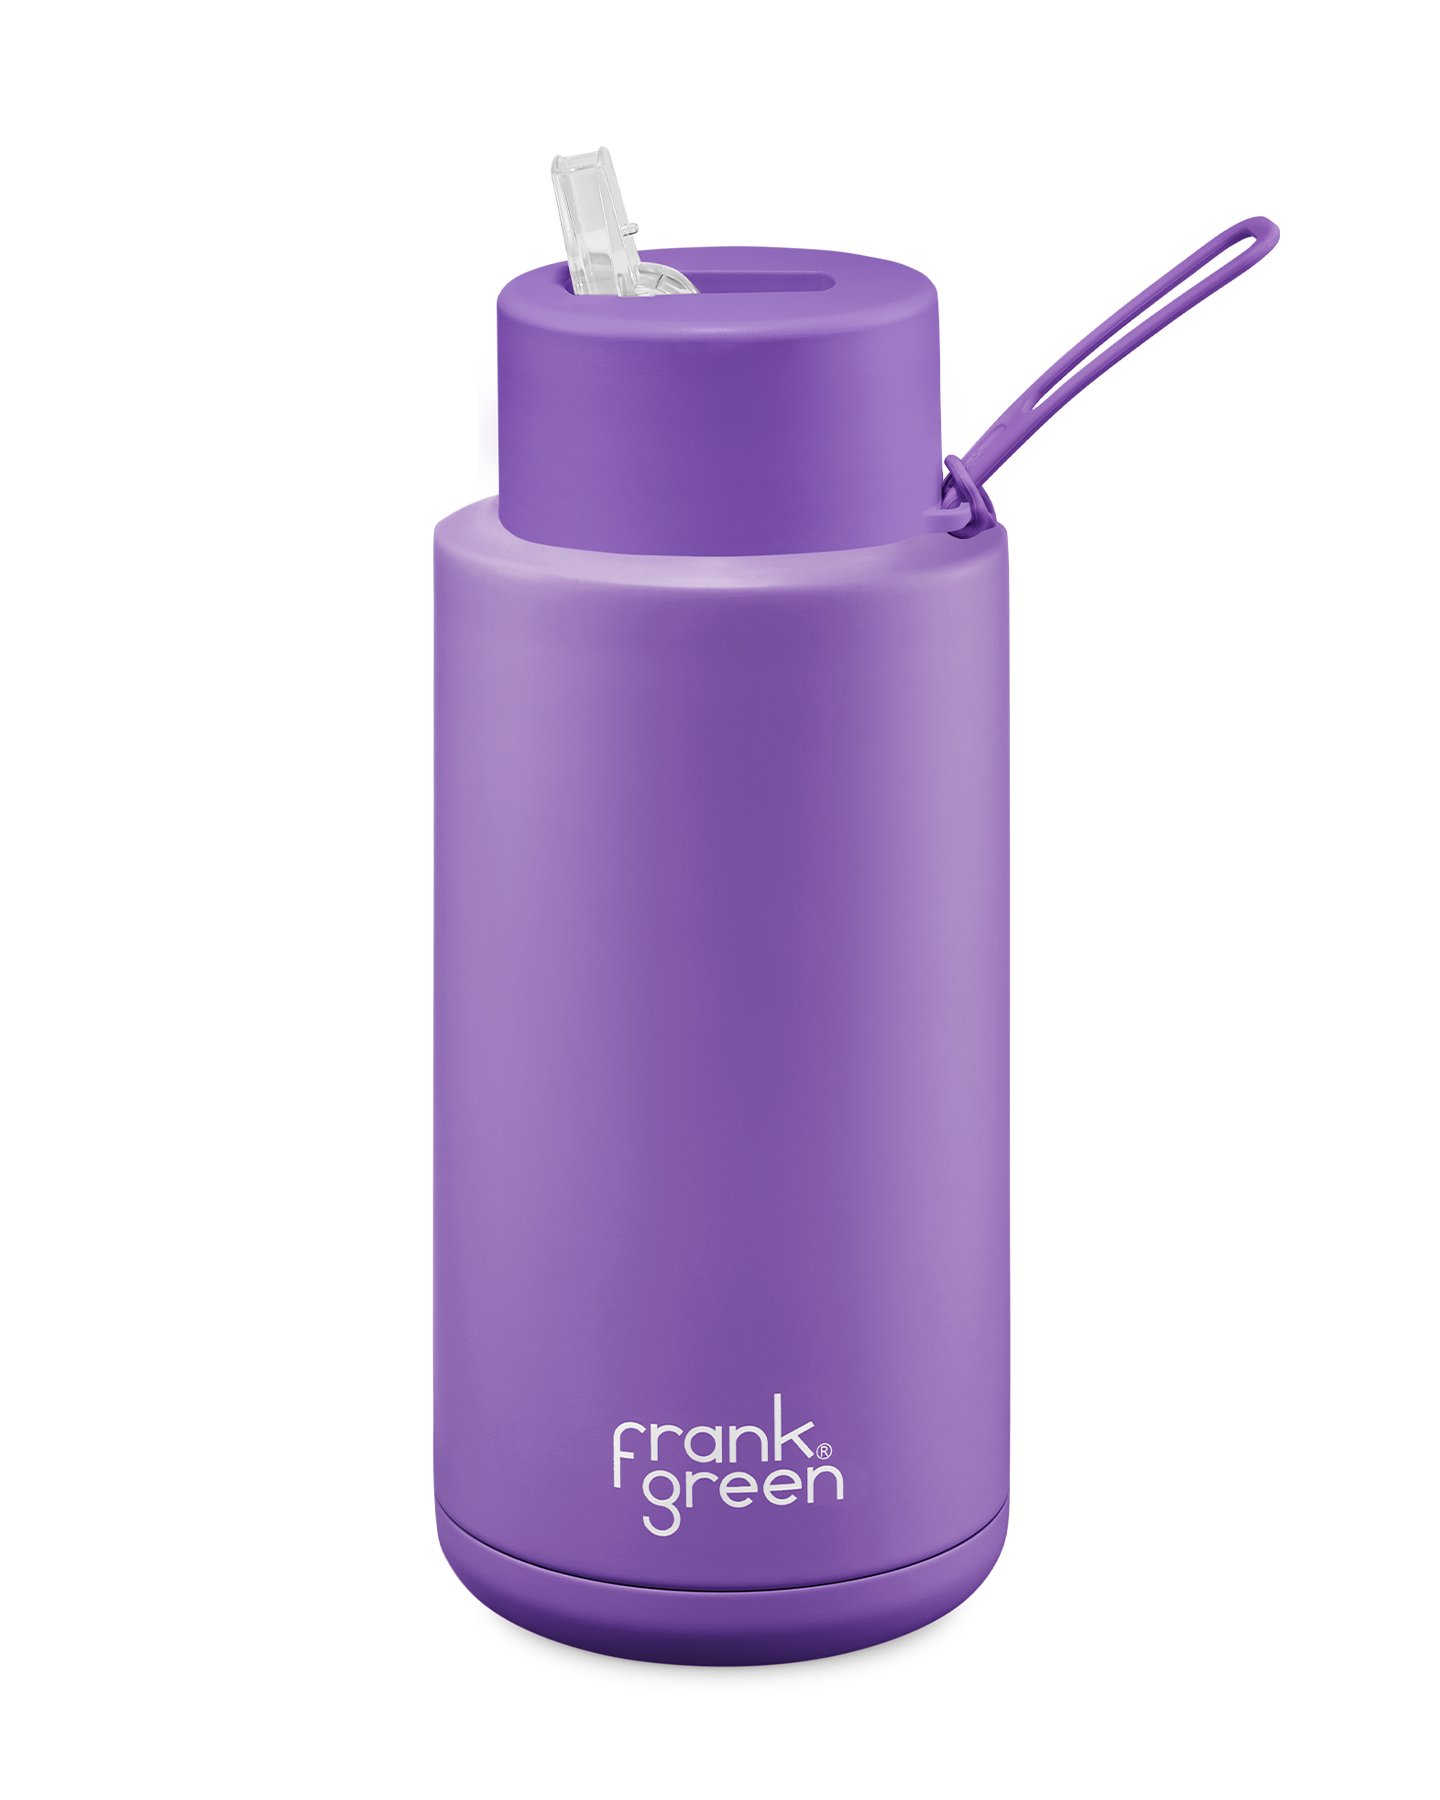 FRANK GREEN CERAMIC REUSABLE BOTTLE 34oz/1 LITRE WITH STRAW LID - COSMIC PURPLE